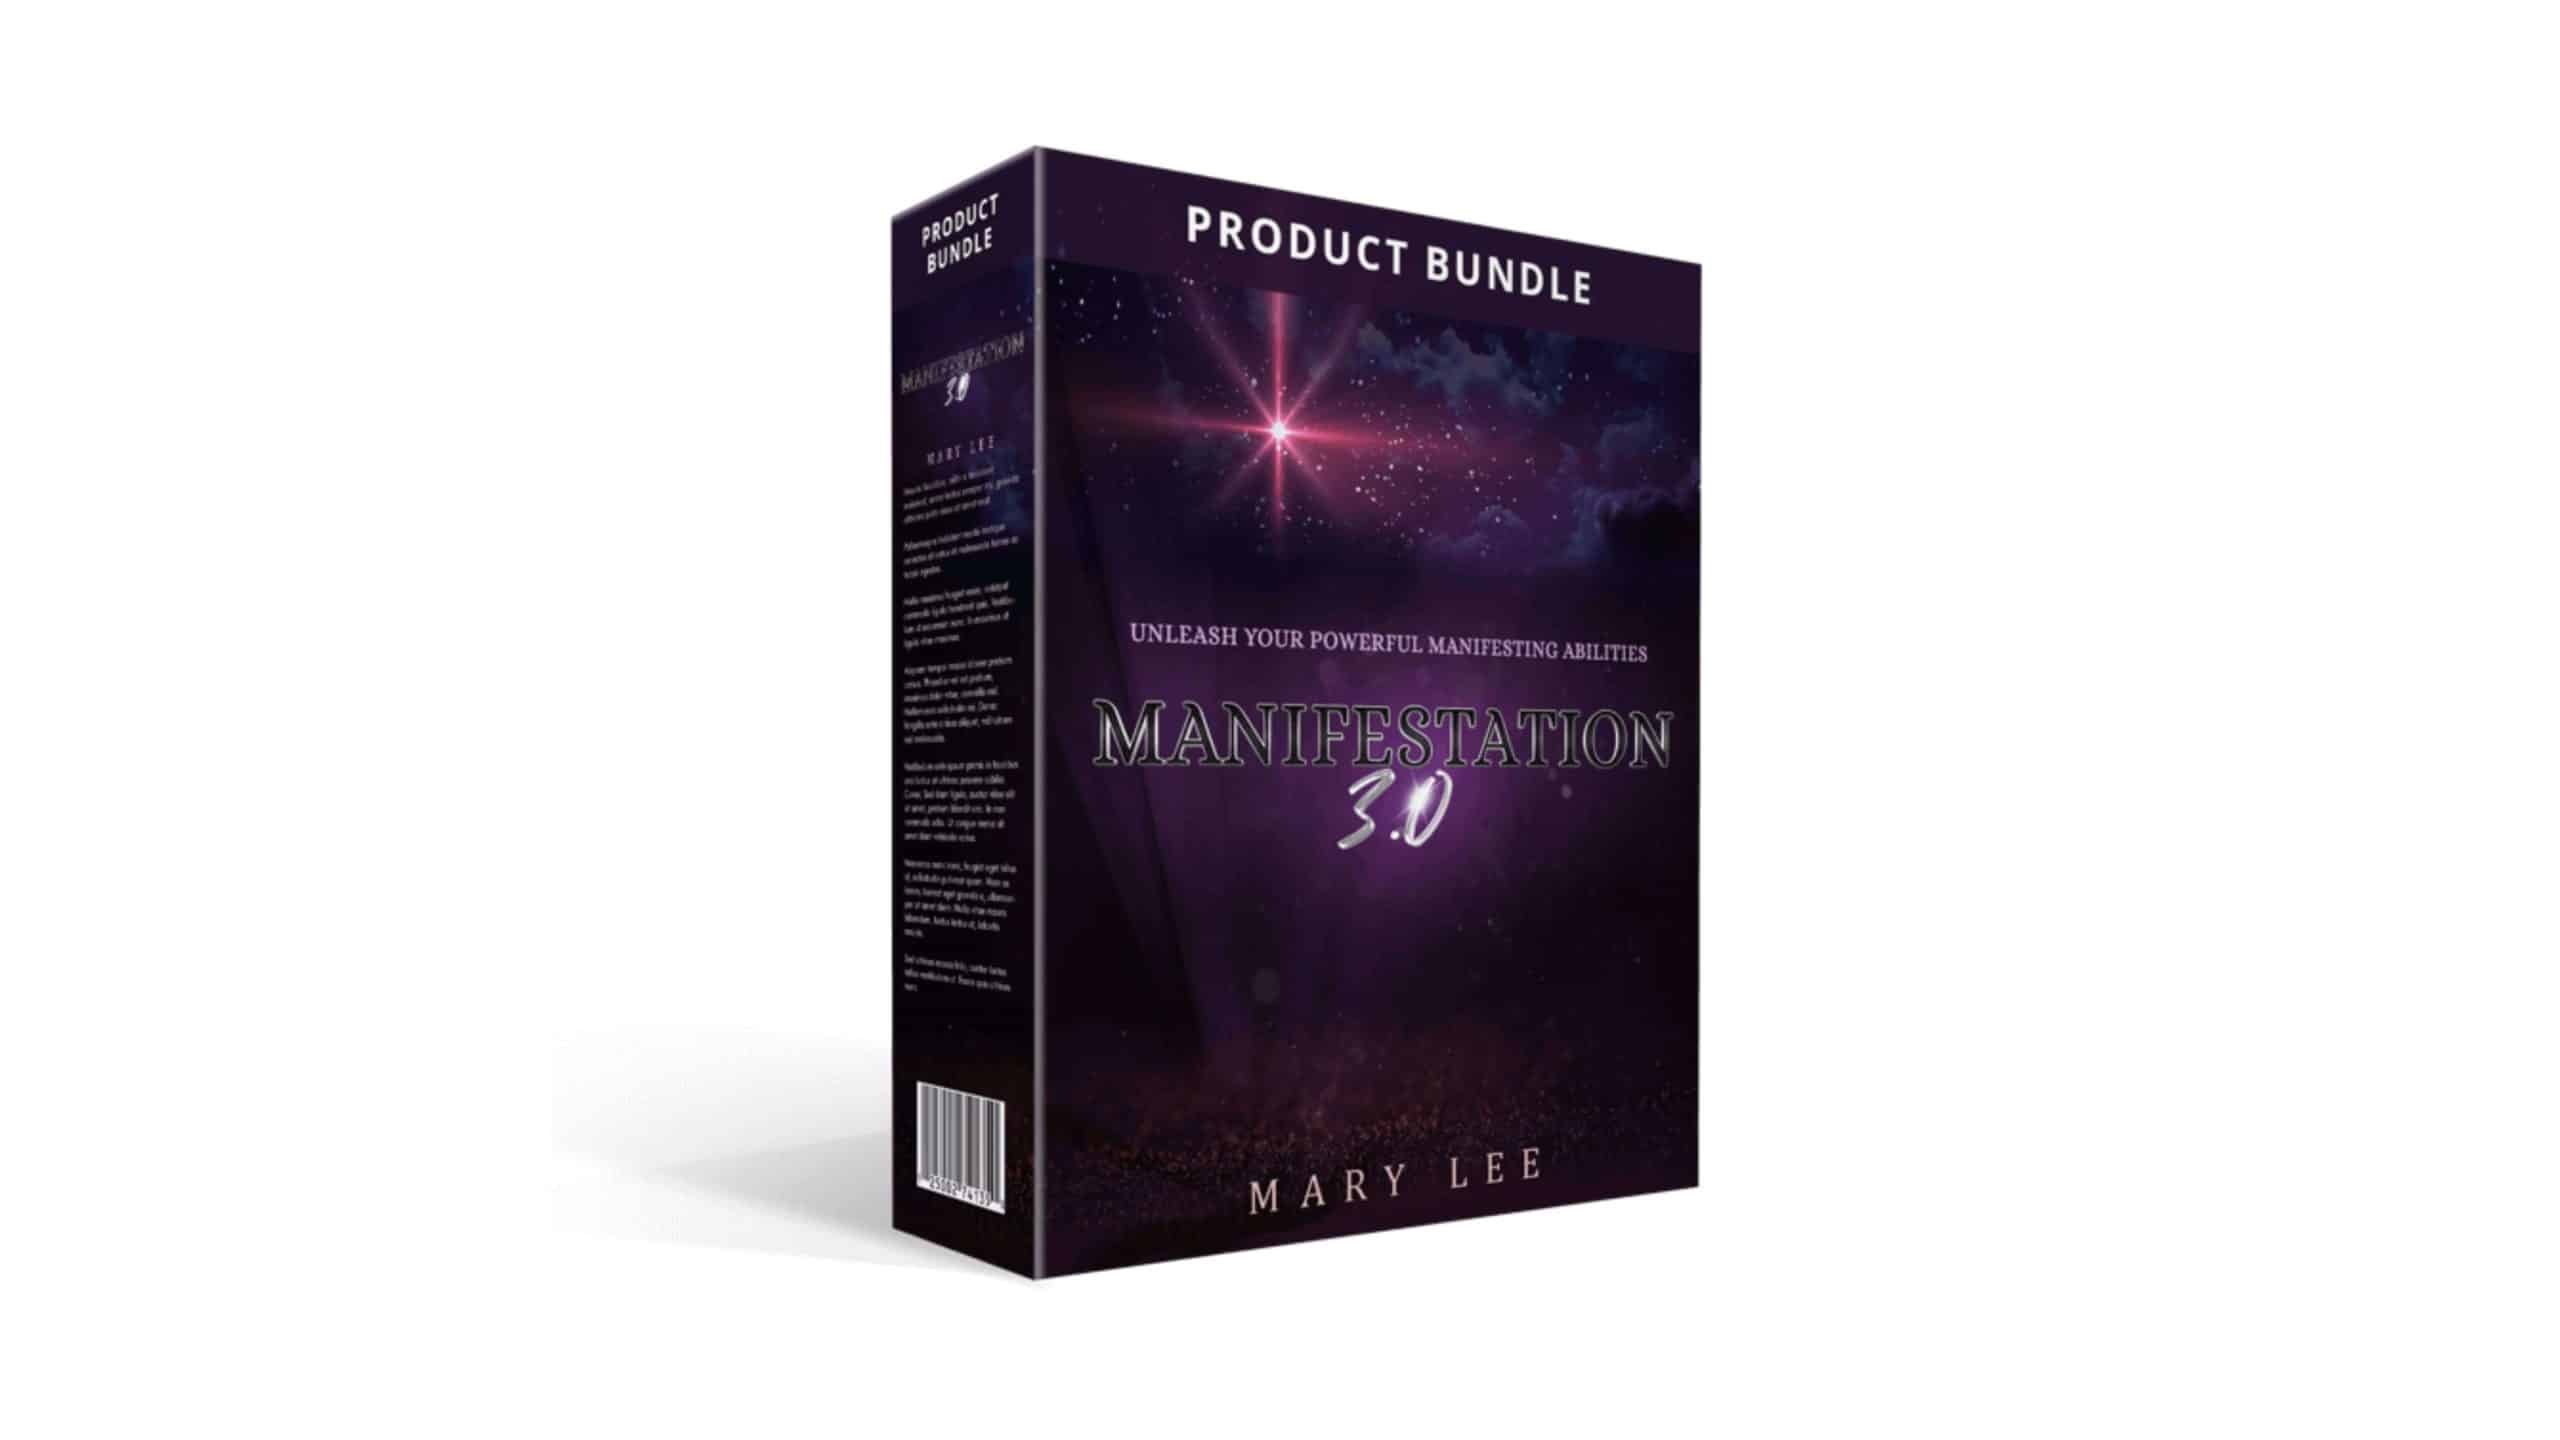 Manifestation 3.0 Reviews: Is Marry Lee&#39;s Audio Program Worth Buying?